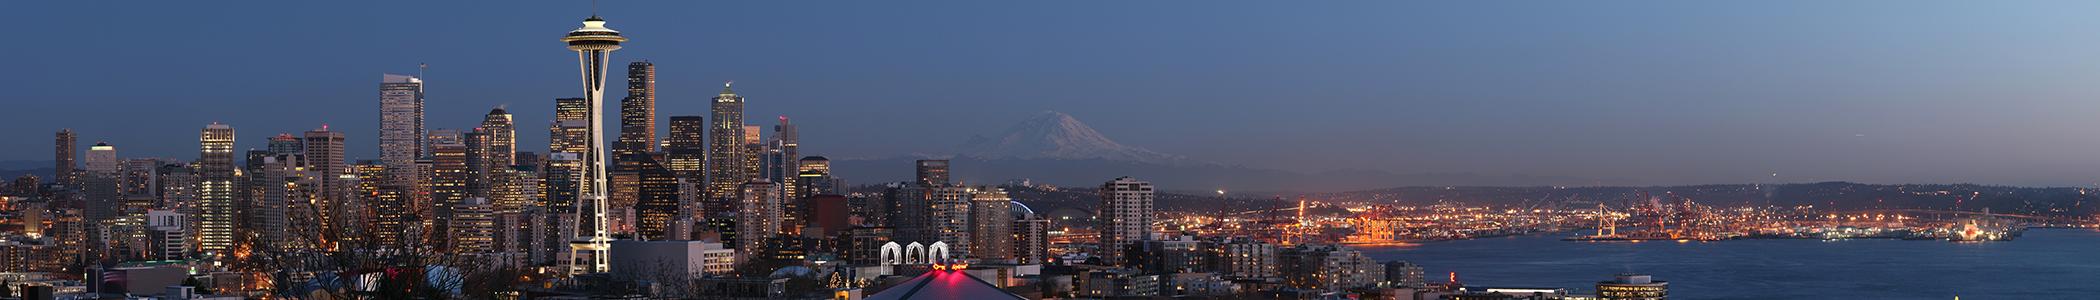 Banner image for Seattle on GigsGuide